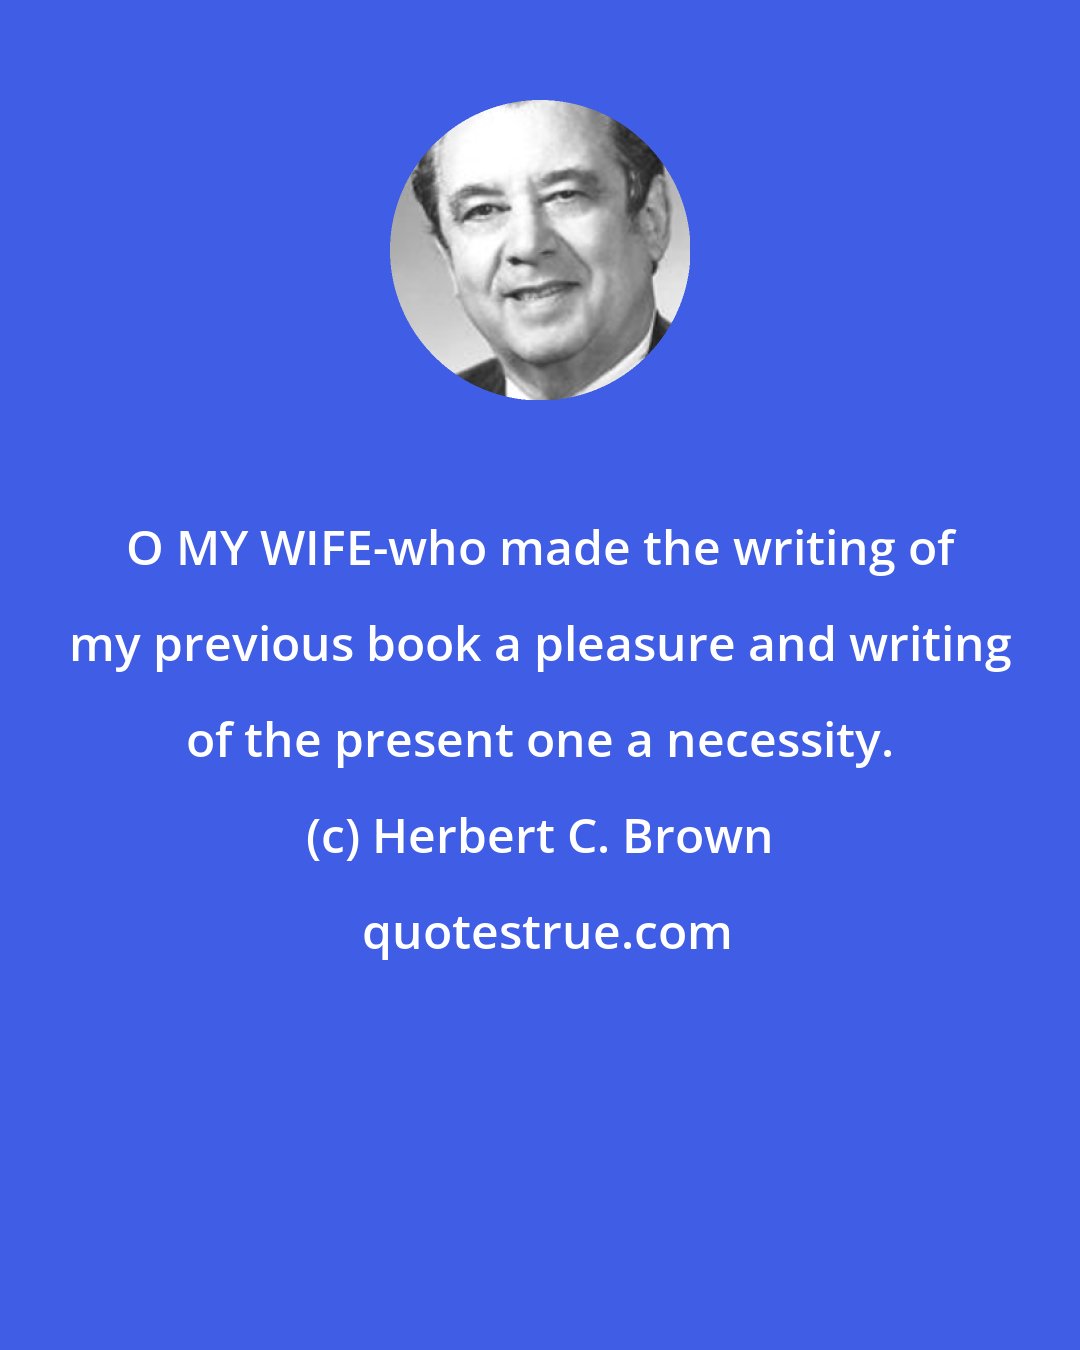 Herbert C. Brown: O MY WIFE-who made the writing of my previous book a pleasure and writing of the present one a necessity.